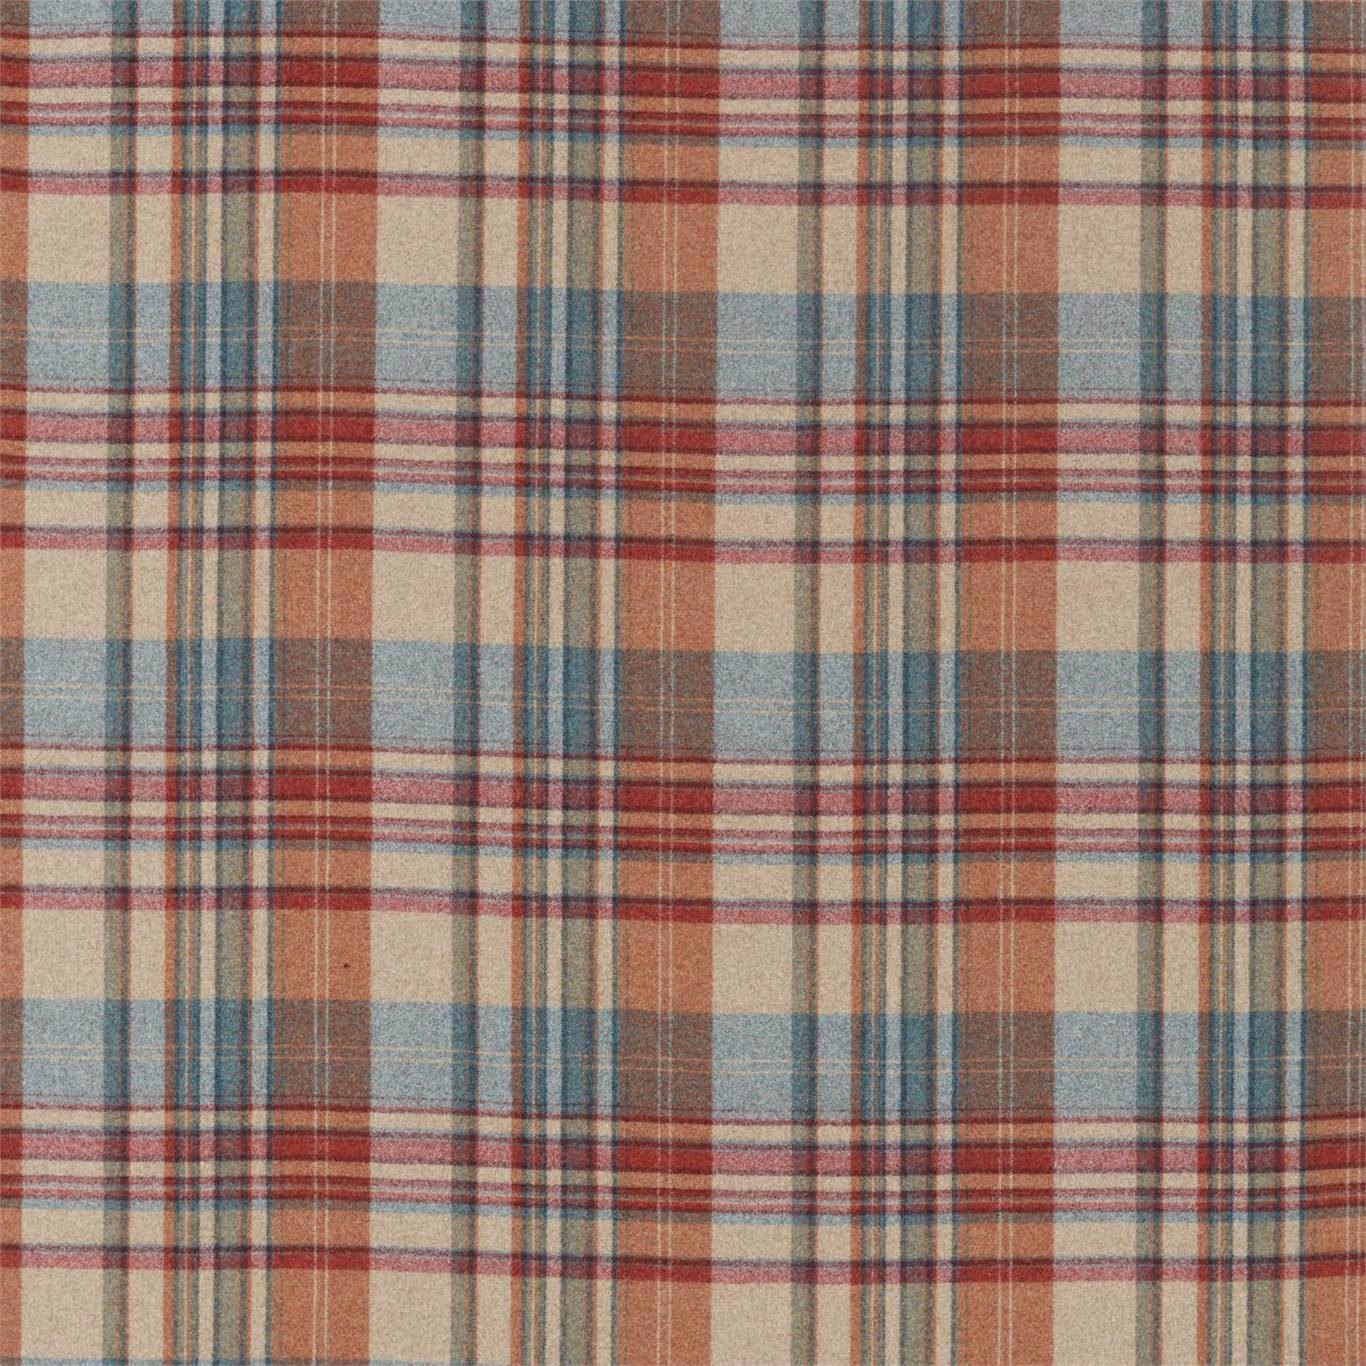 a plaid fabric with a red and blue pattern